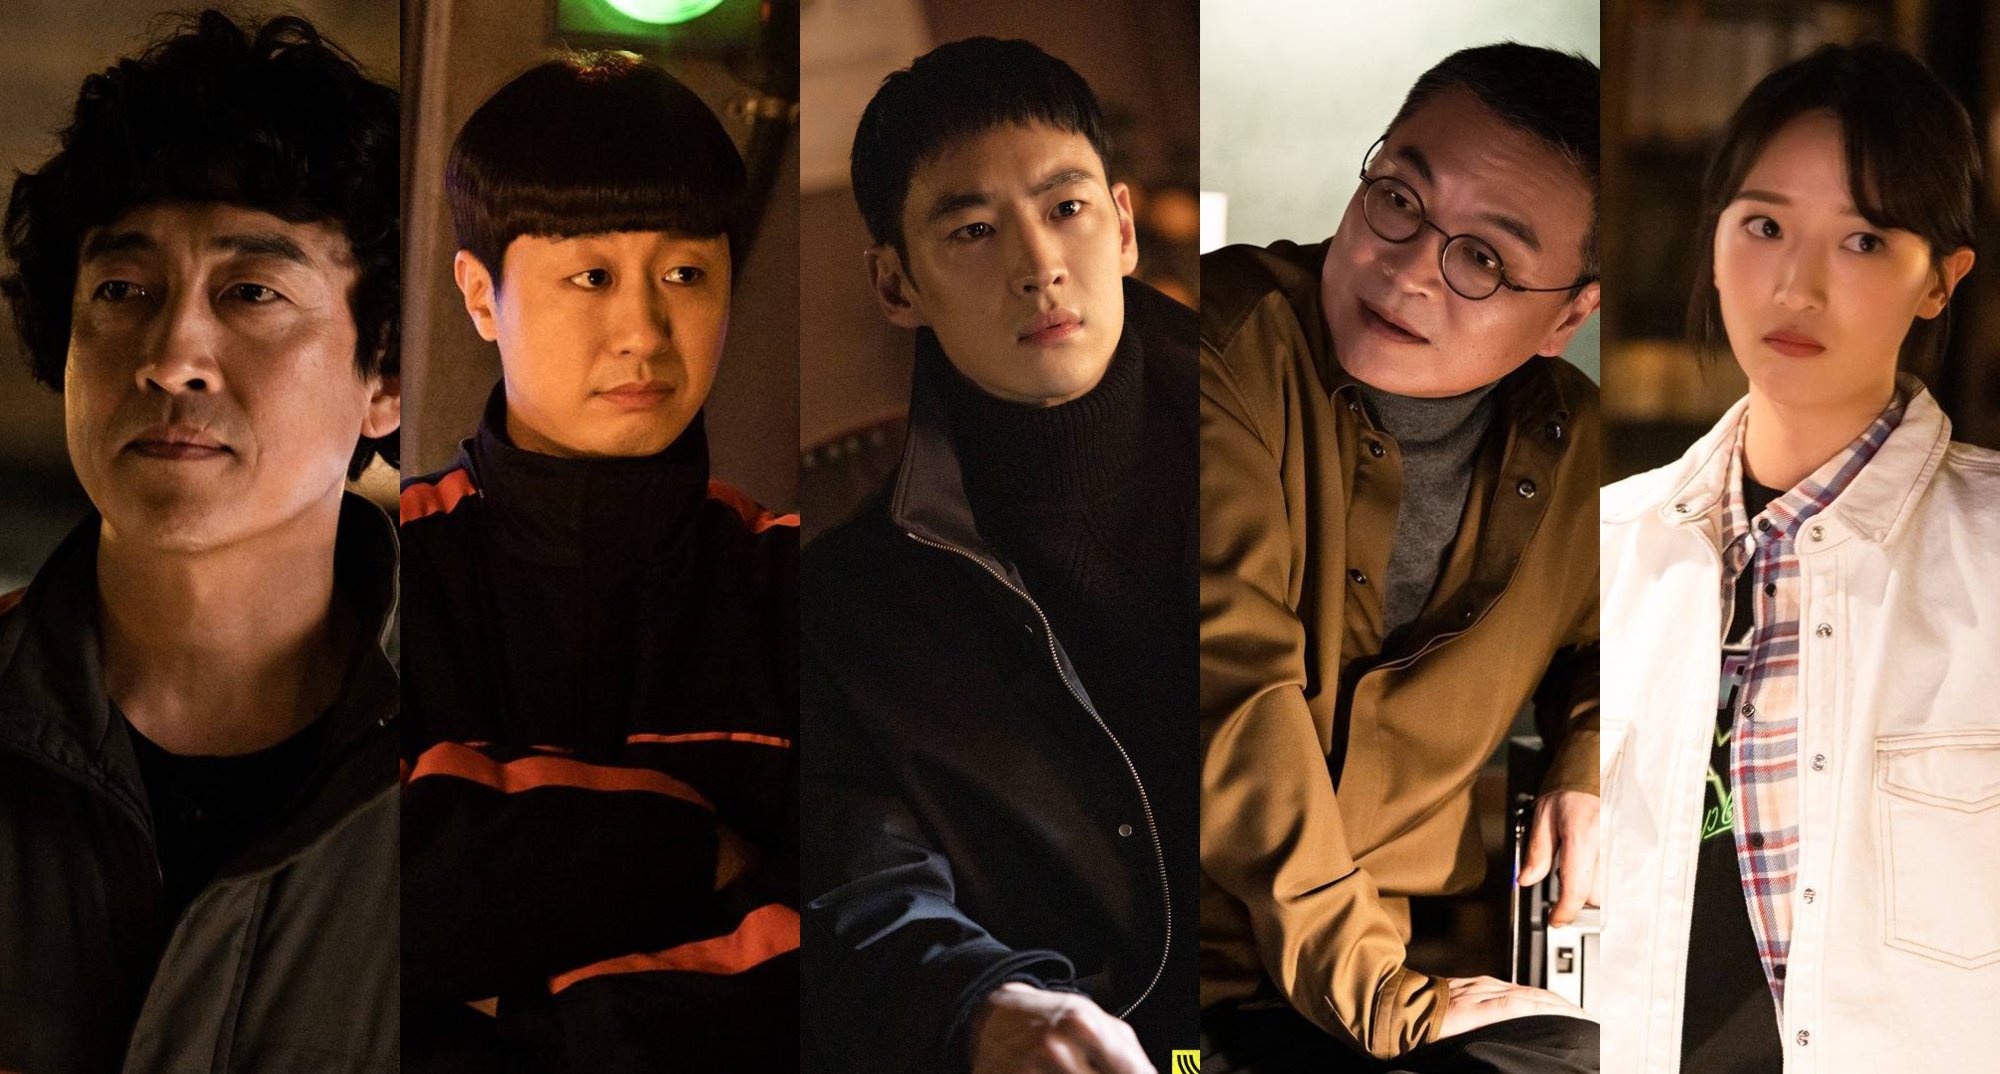 Main cast for 'Taxi Driver' Season 2 K-drama in hideout.